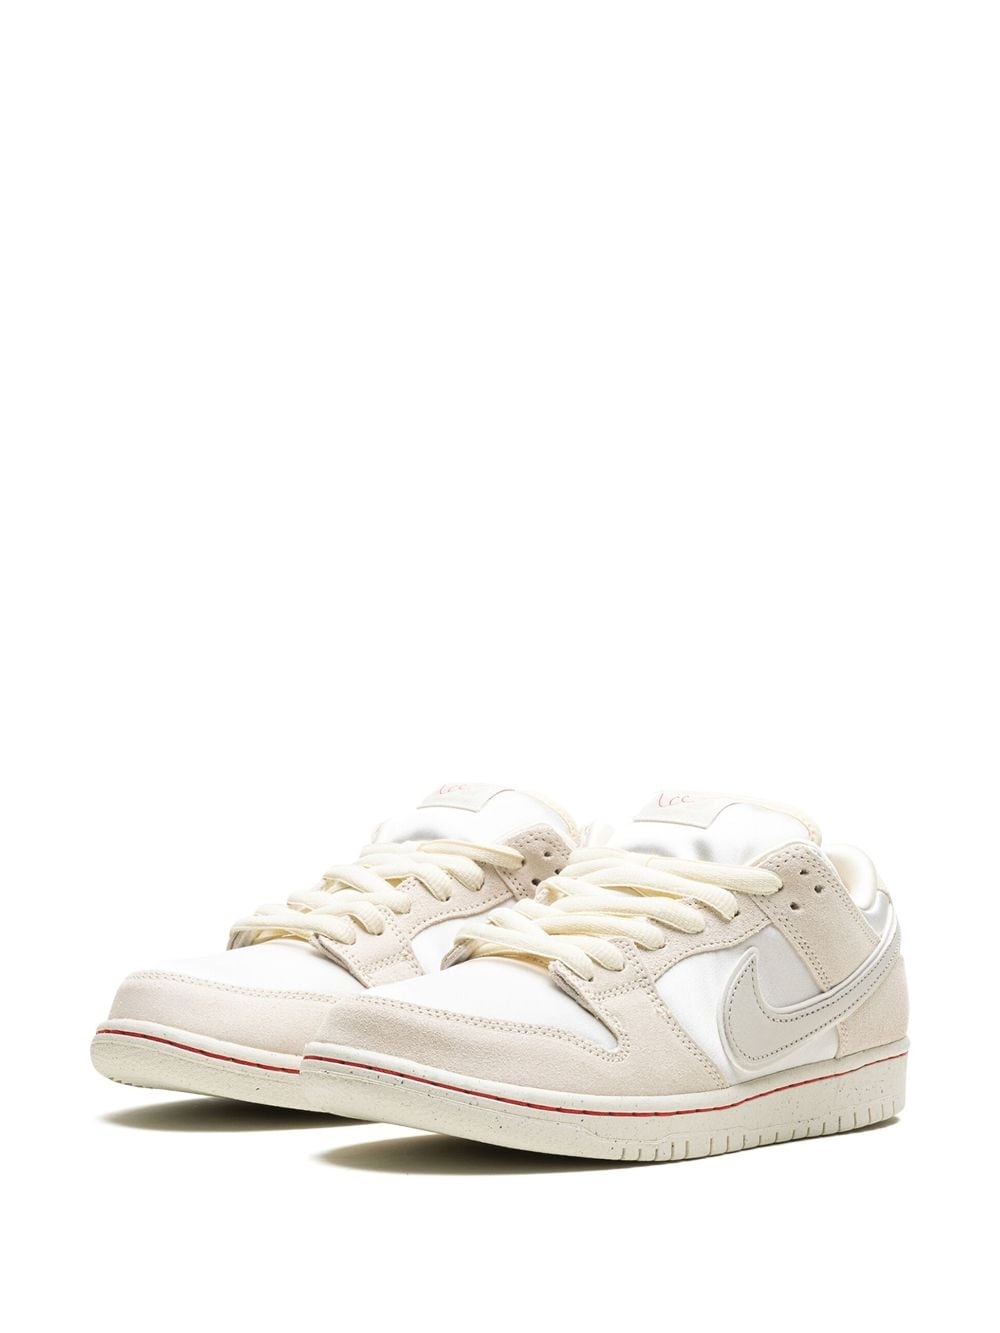 SB Dunk Low "Valentine's Day - Low Love Found" sneakers - 5